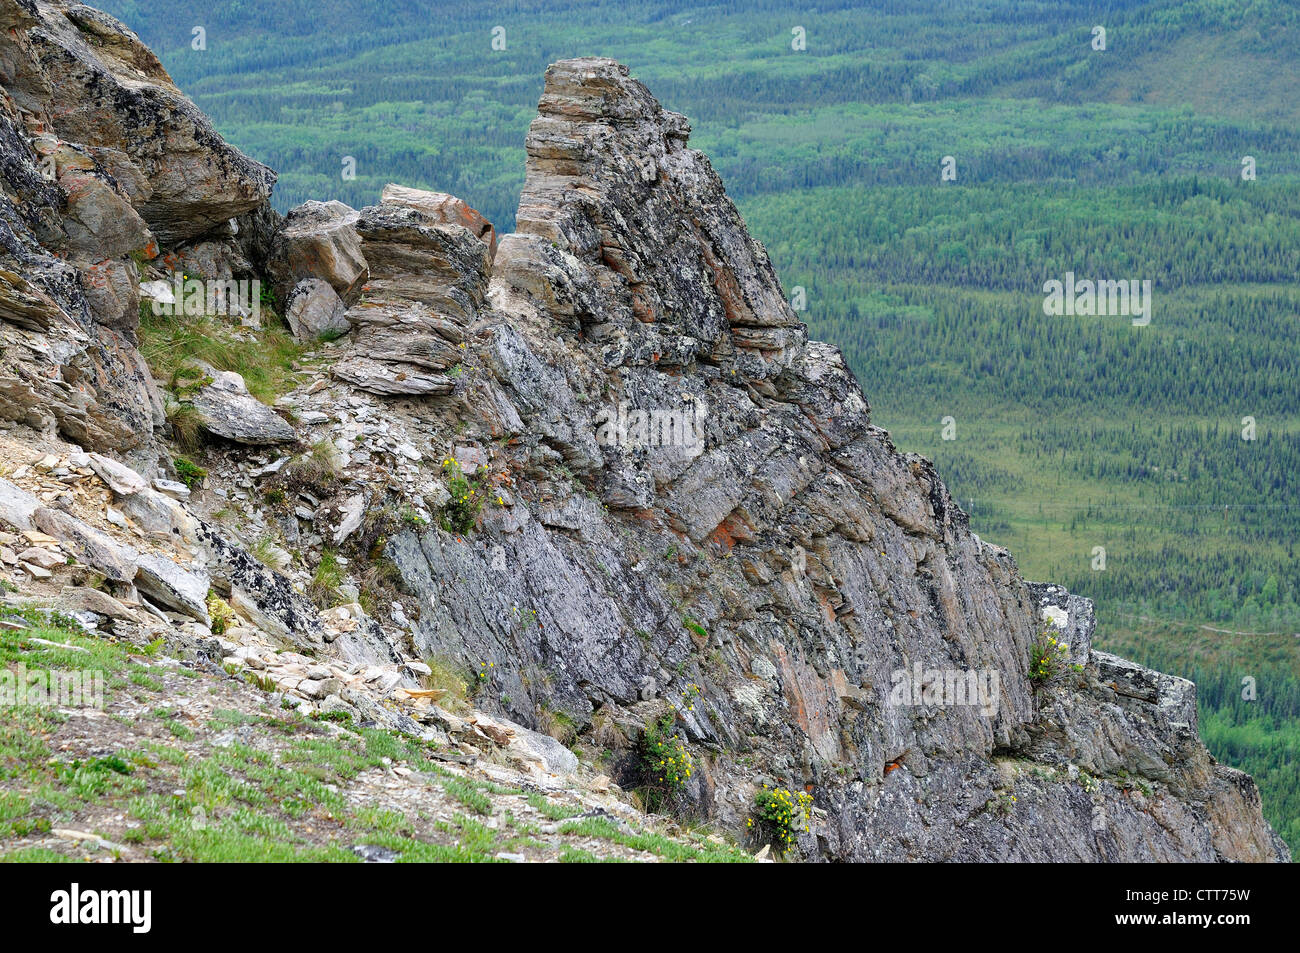 Outcrop of mica schist at Mt. Healy. Denali National Park and Preserve, Alaska, USA. Stock Photo